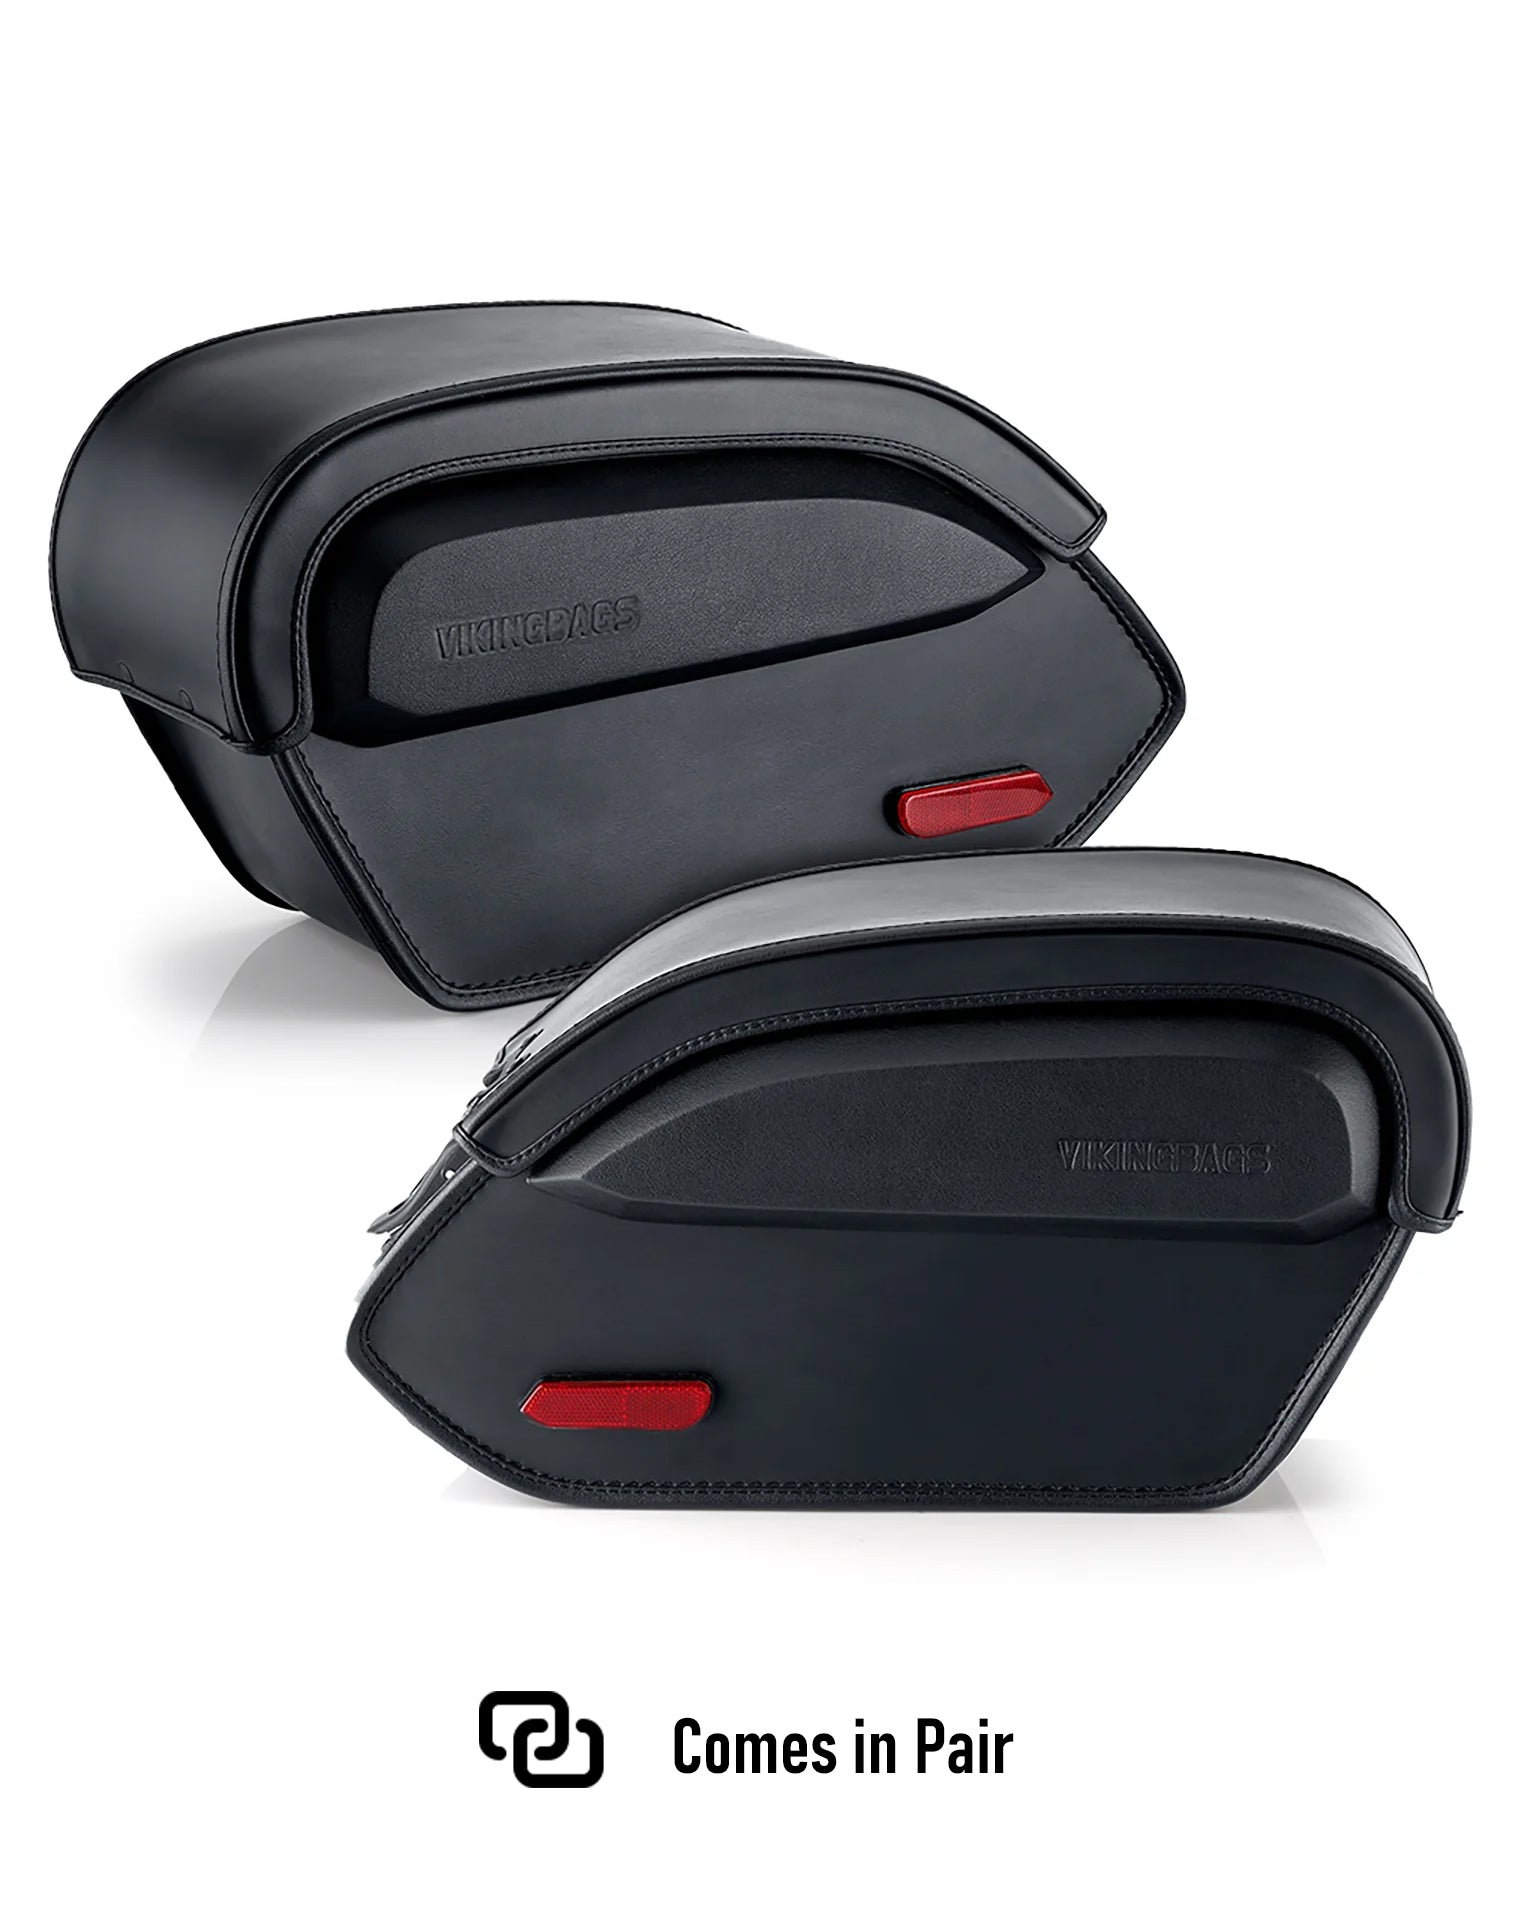 Viking Aviator Large Suzuki Boulevard M50 Vz800 Leather Motorcycle Saddlebags Weather Resistant Bags Comes in Pair